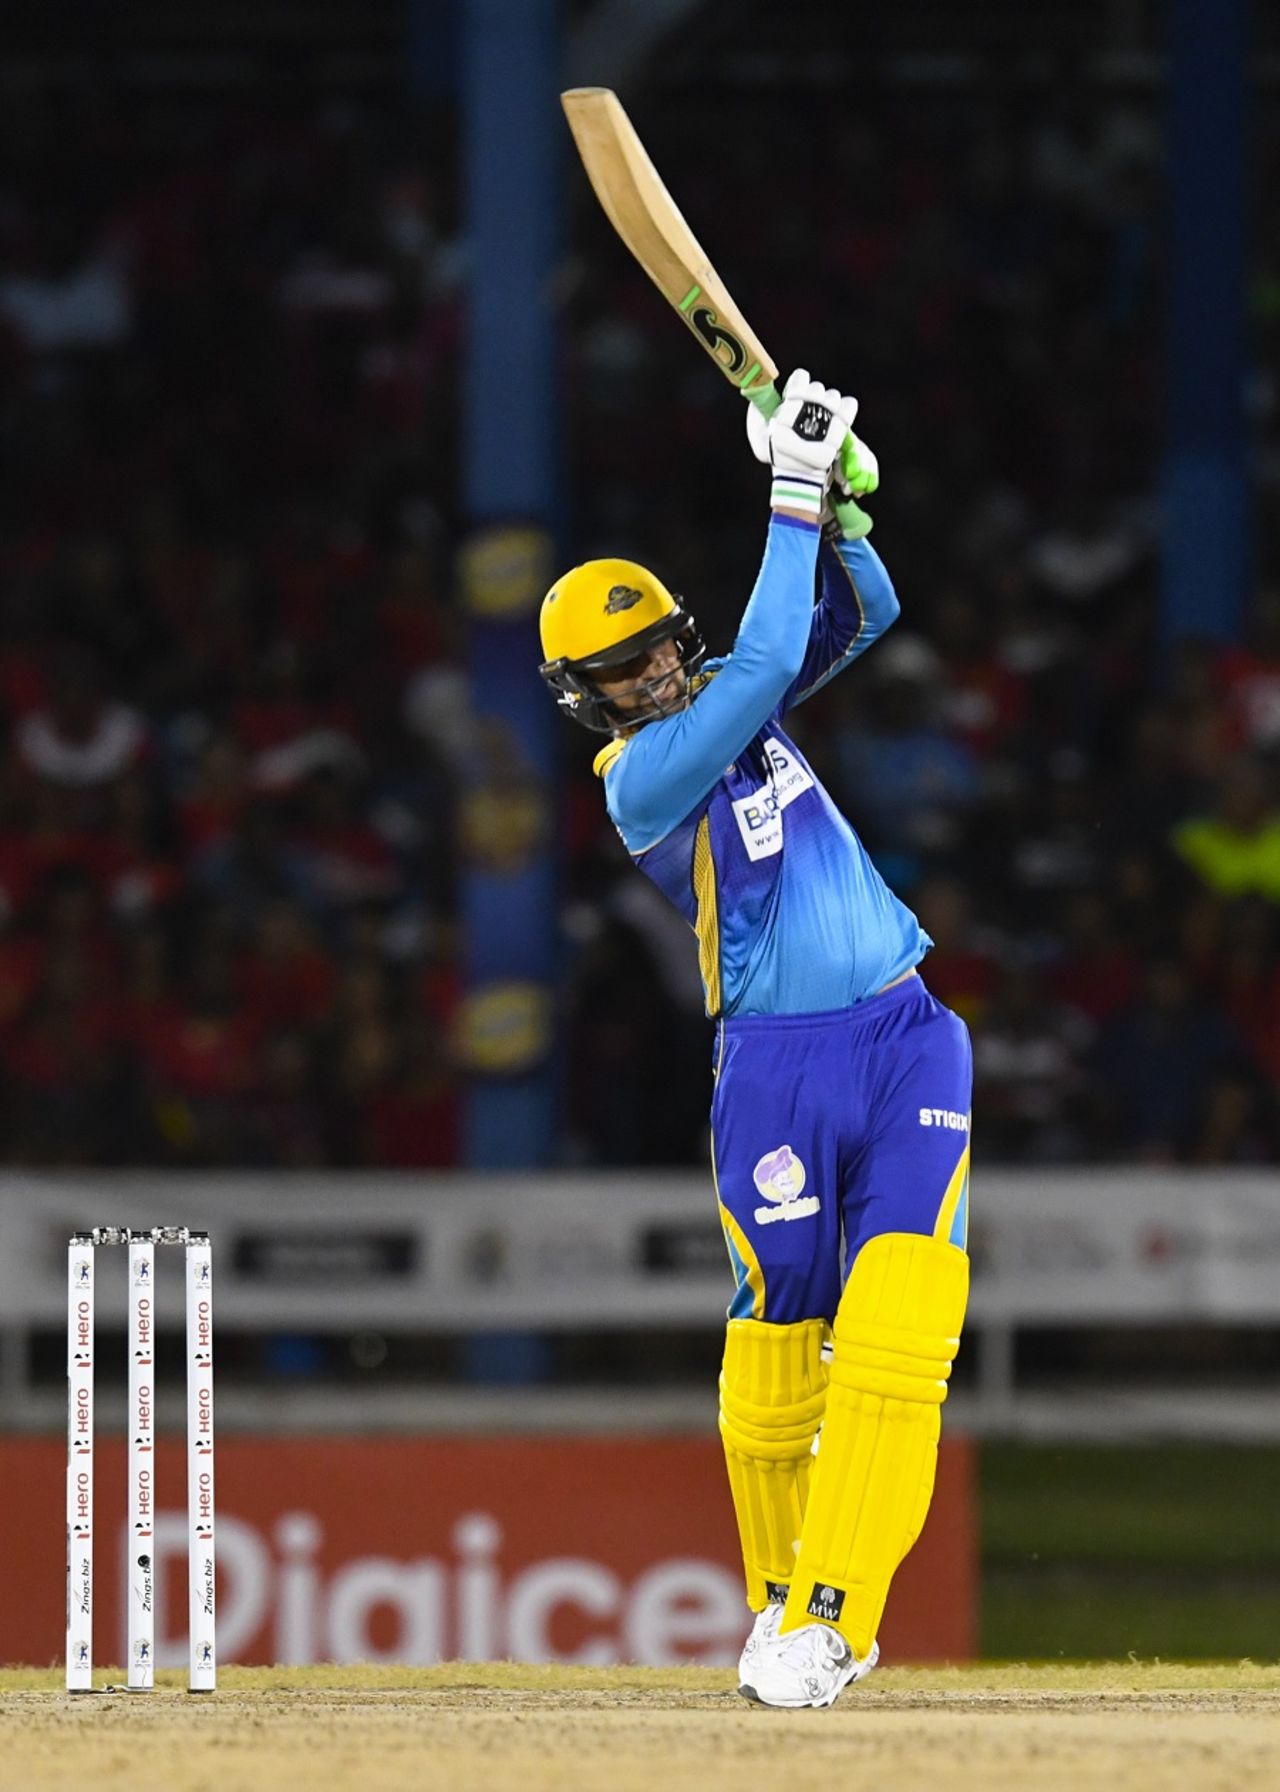 Shoaib Malik crossed 7000 runs in T20 cricket during his knock of 51, Barbados Tridents v Trinbago Knight Riders, CPL 2017, Port of Spain, August 12, 2017